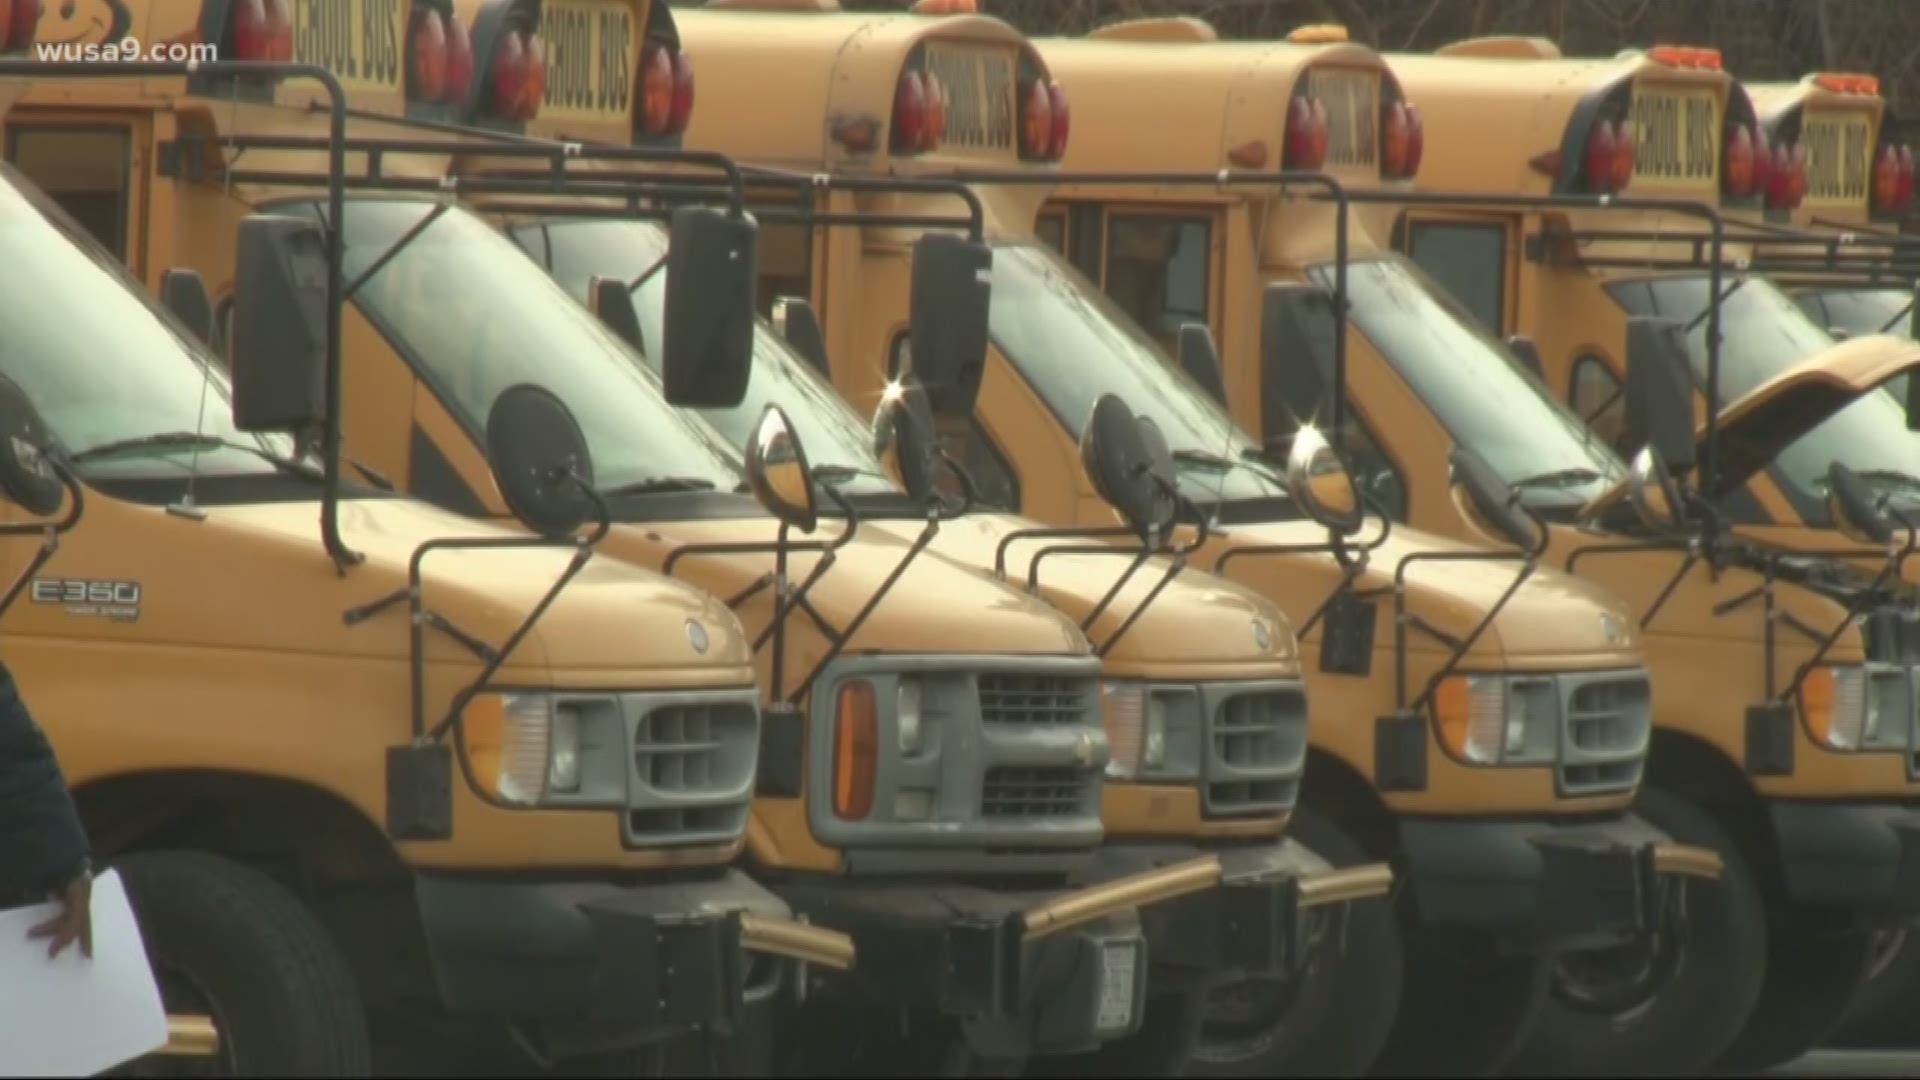 Alexandria's DASH bus fleet could become zero-emissions along with school buses in Maryland.